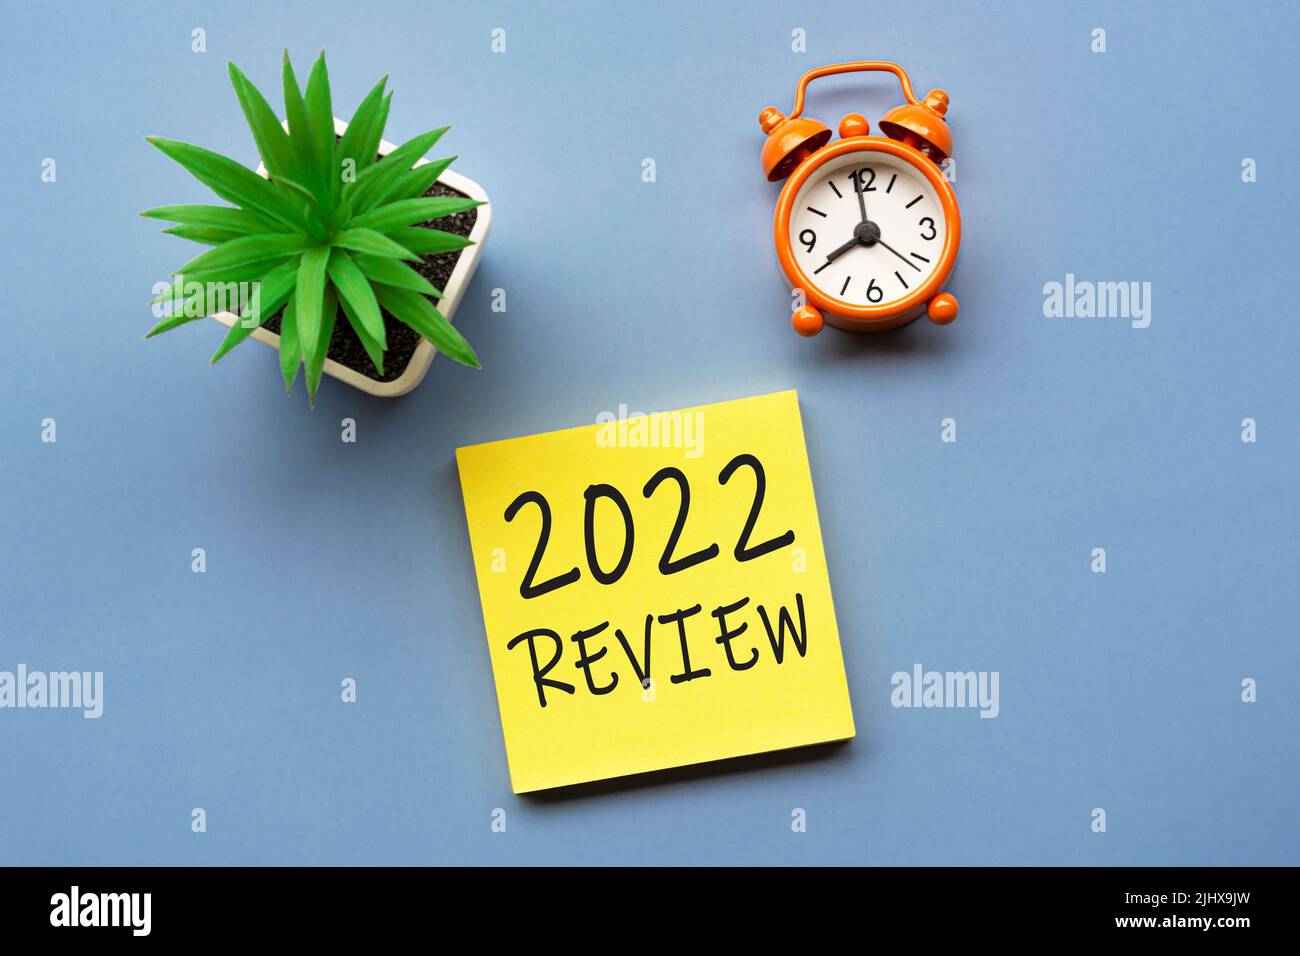 2022 Review written on Adhesive Note with alarm clock set at 8 o'clock. Stock Photo